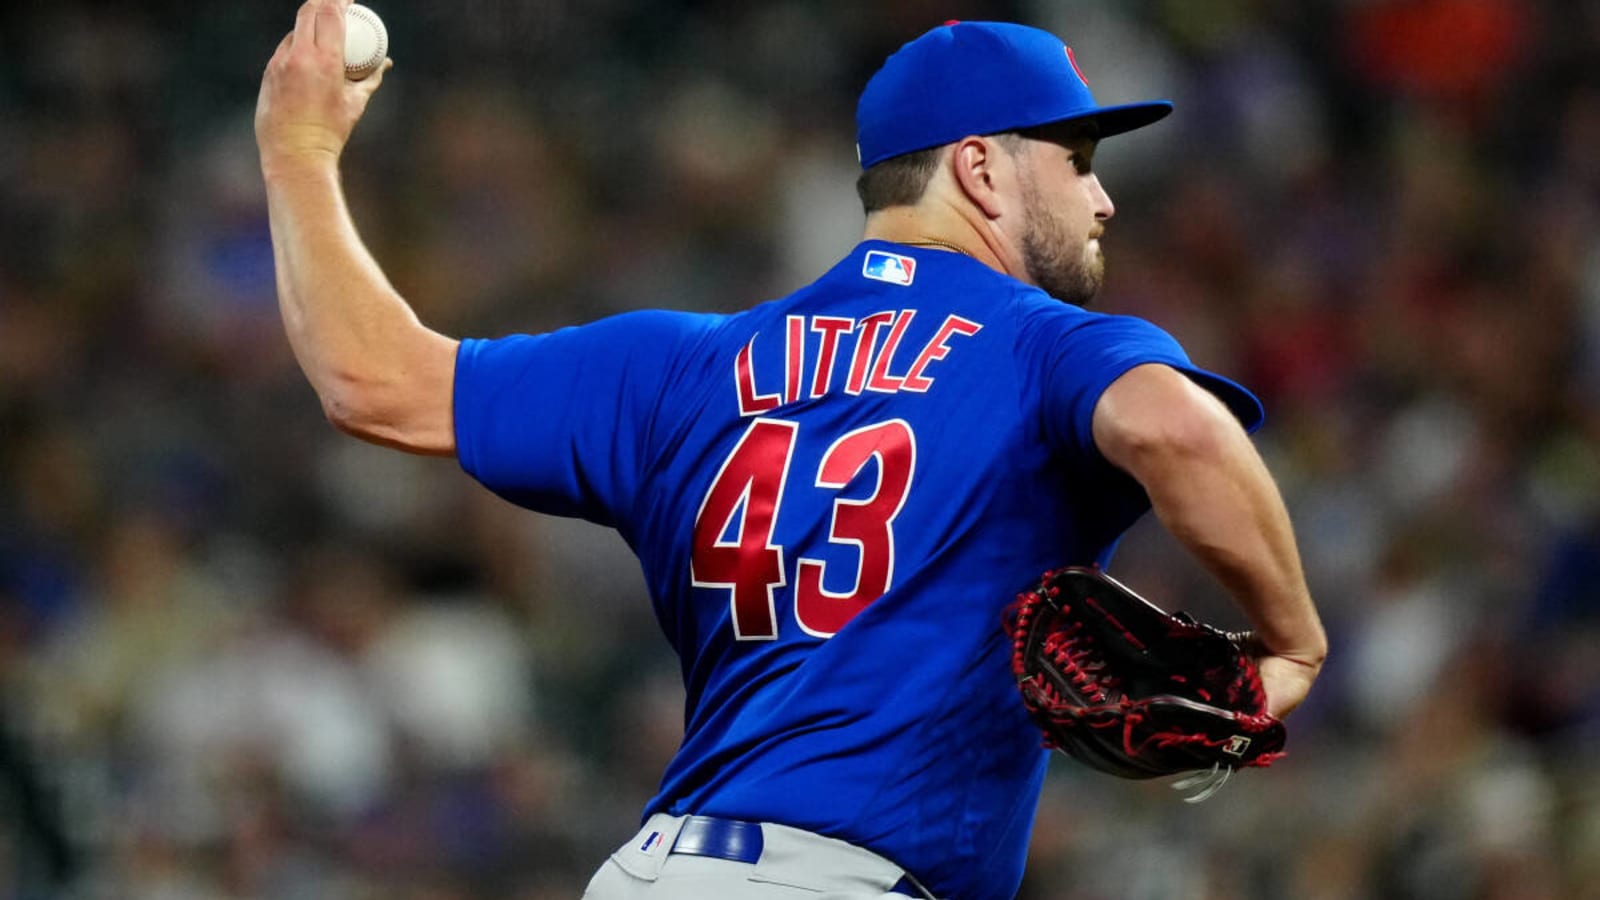 Could Luke Little Be Just What The Cubs Have Been Missing?